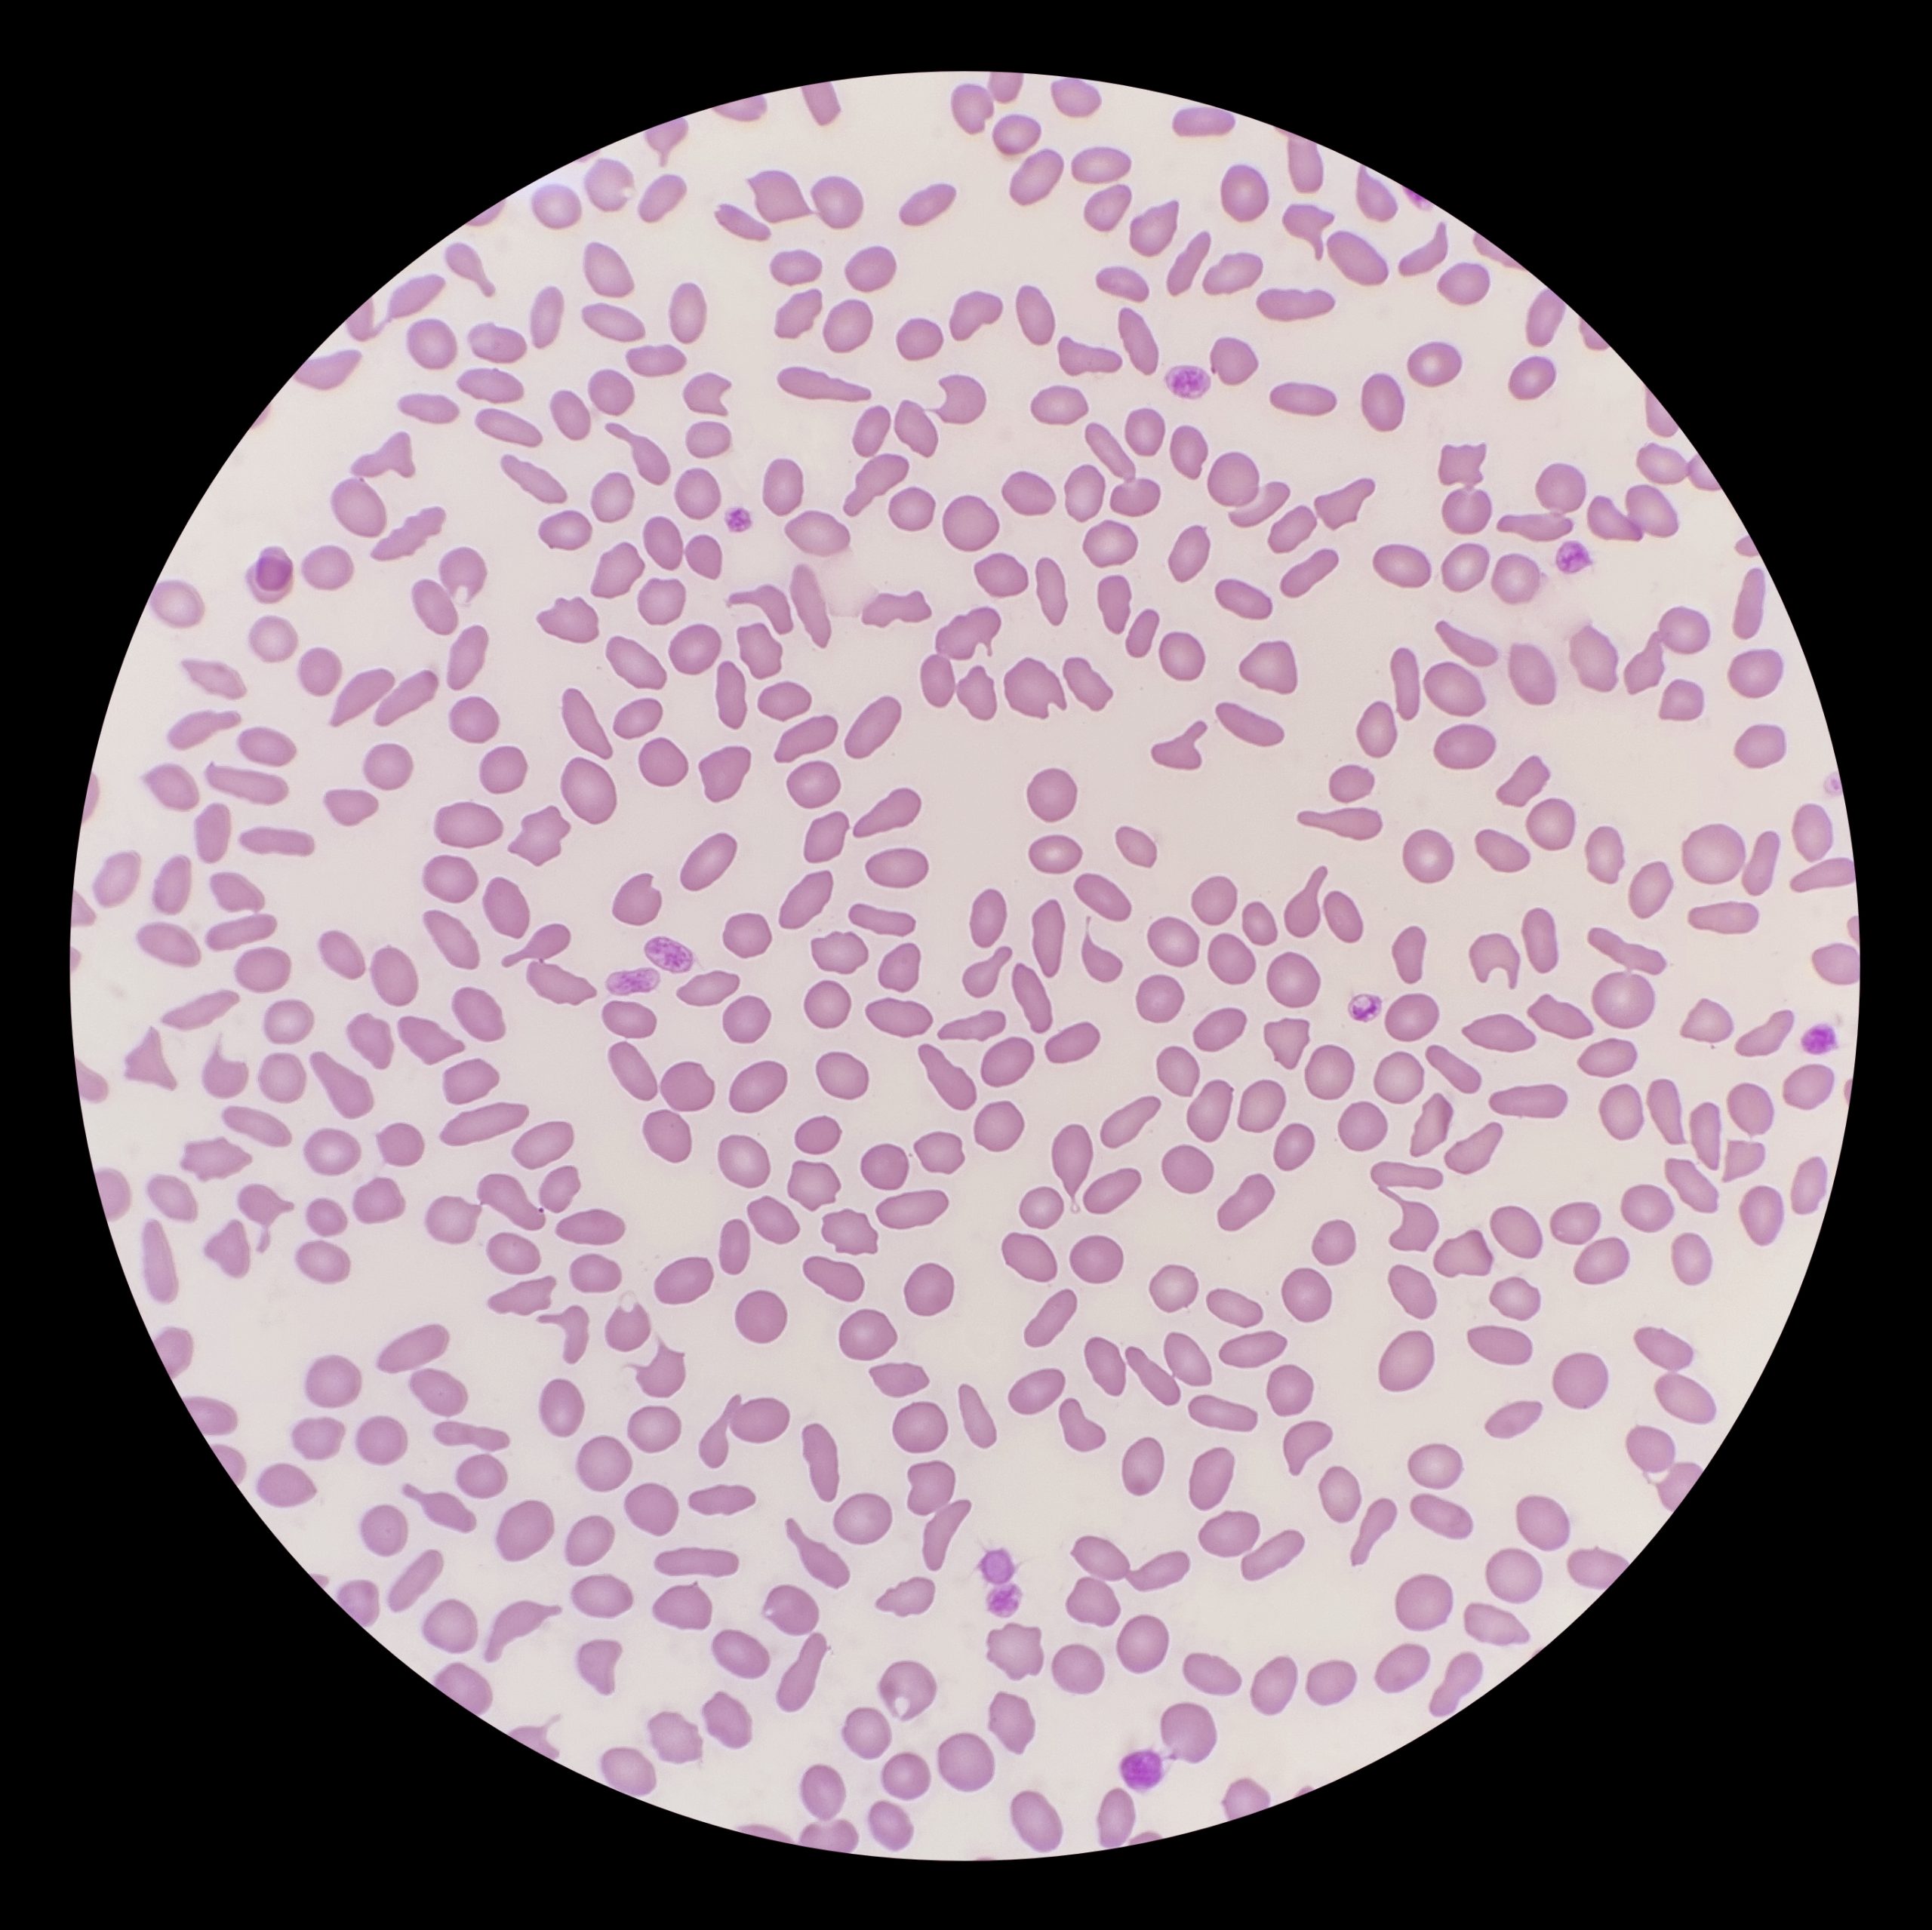 Blood smear from a cat with anaemia